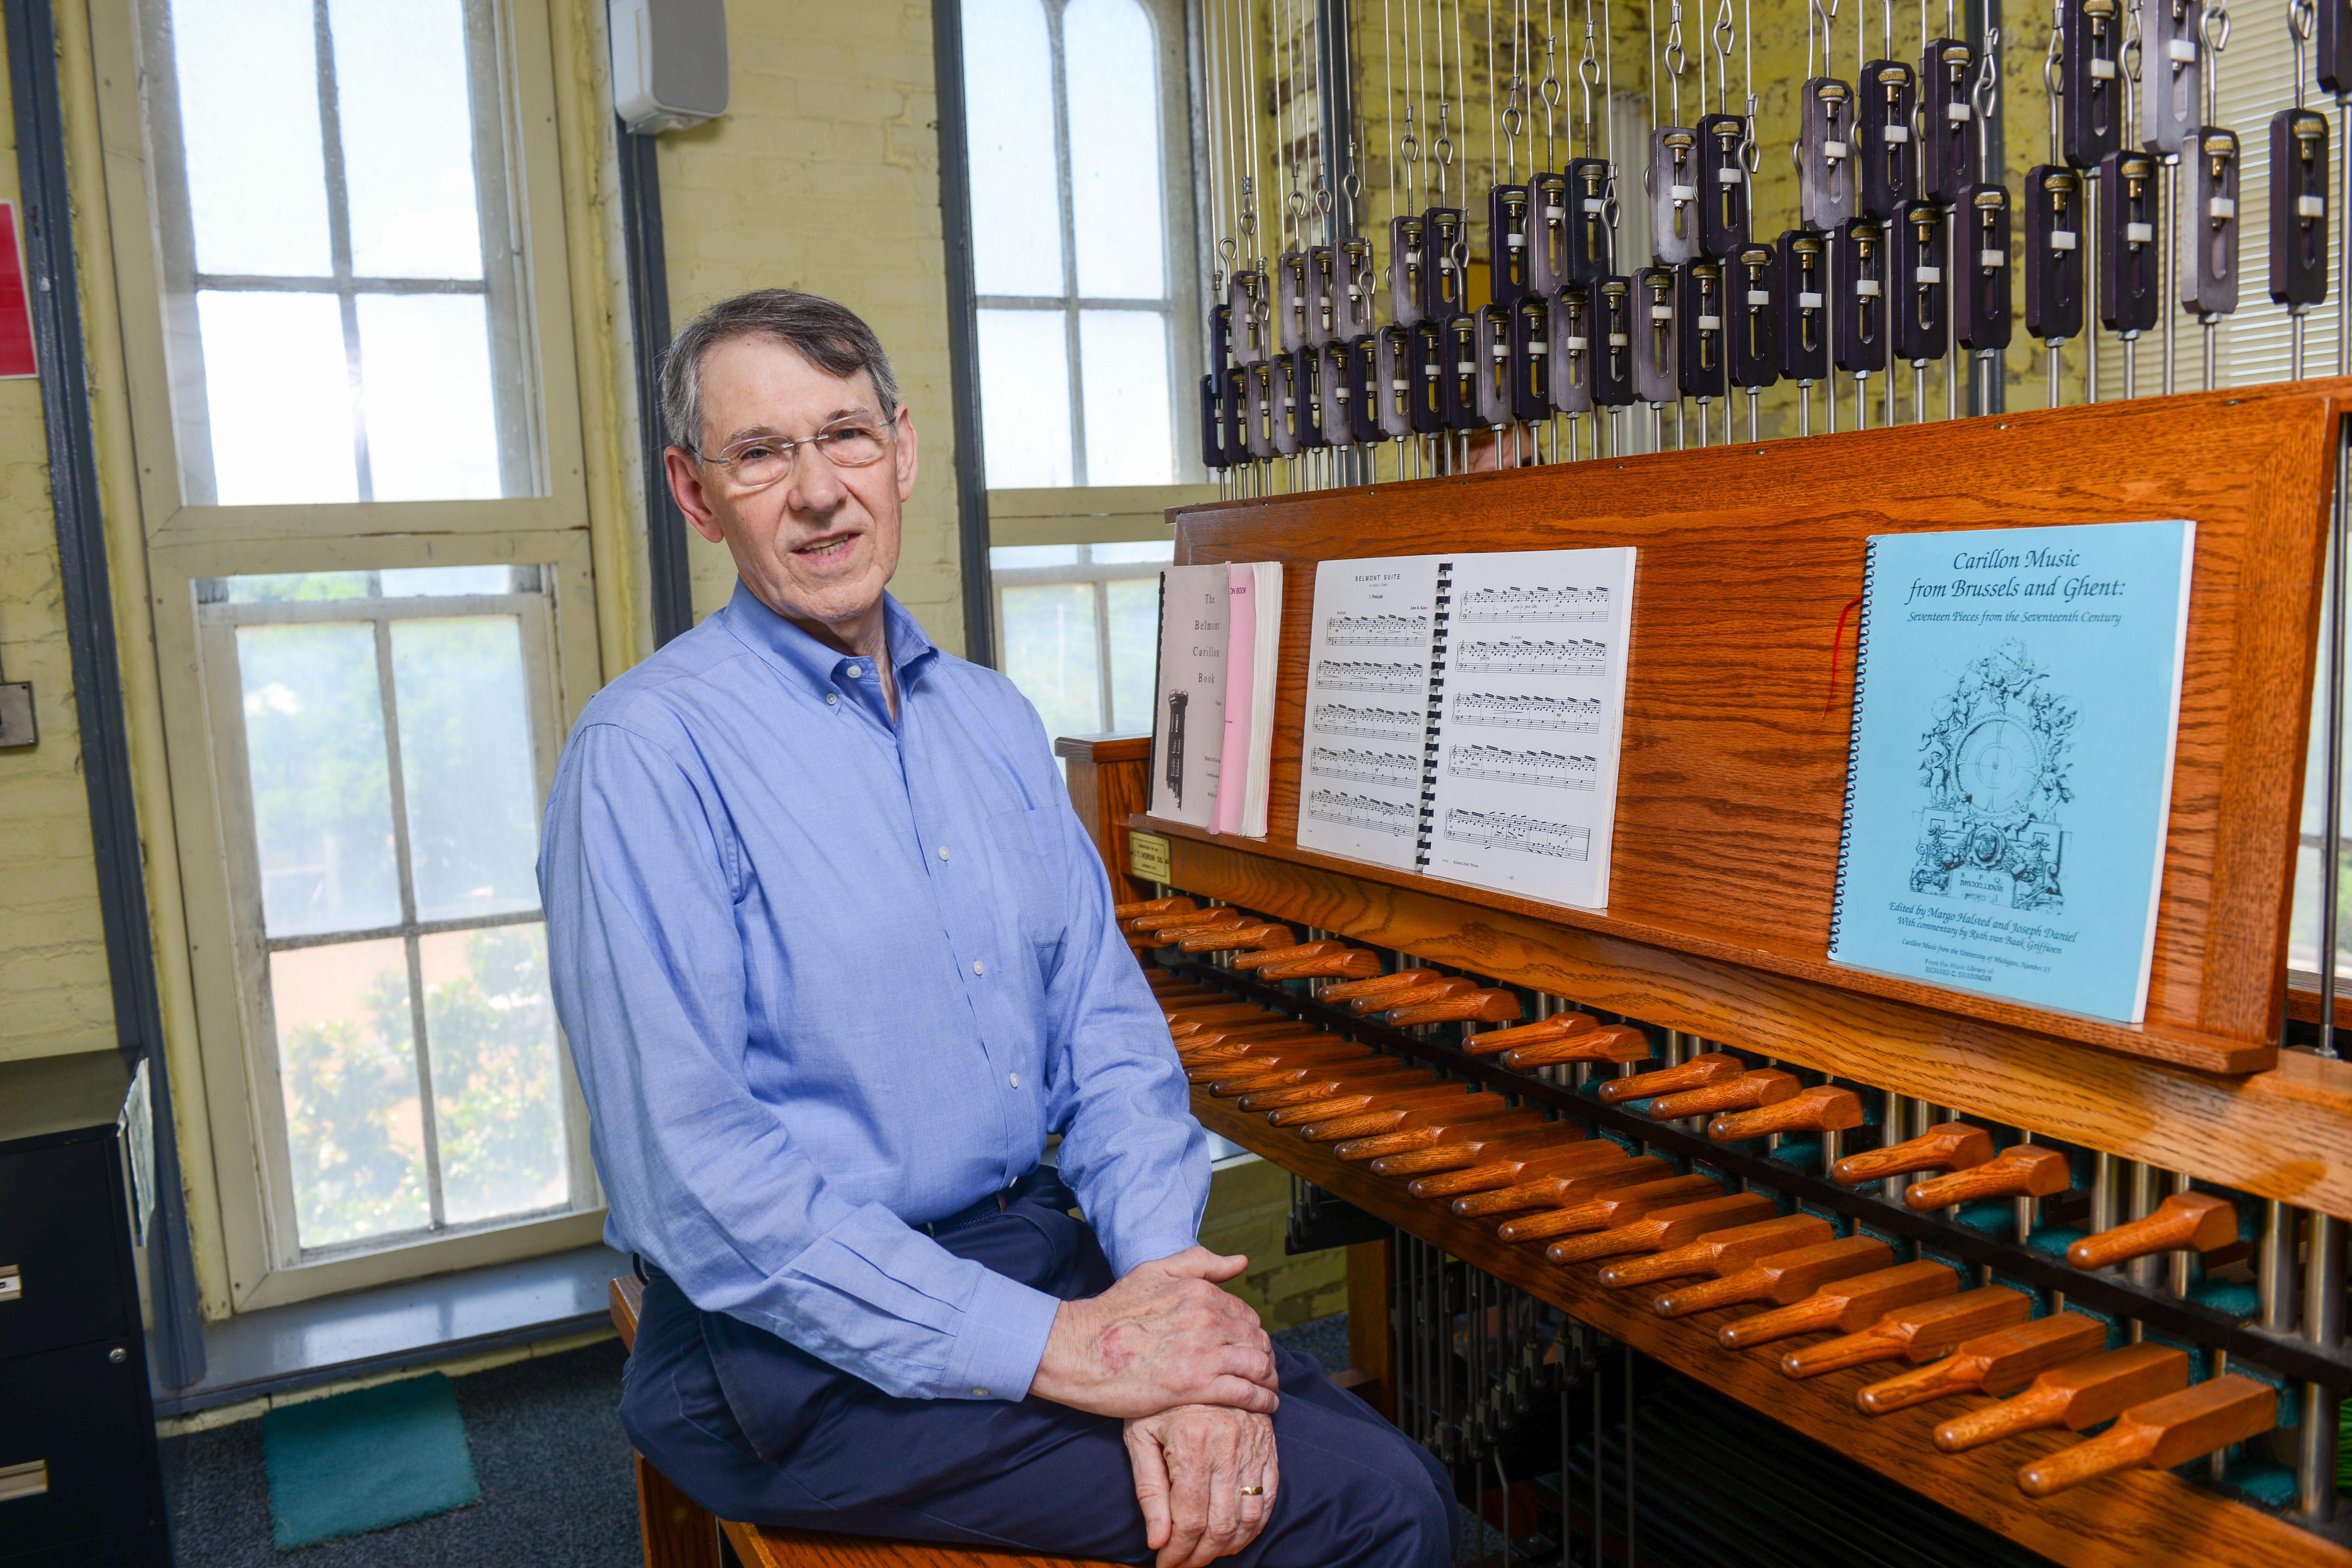 Dr. Richard Shadinger in front of the carillon system.